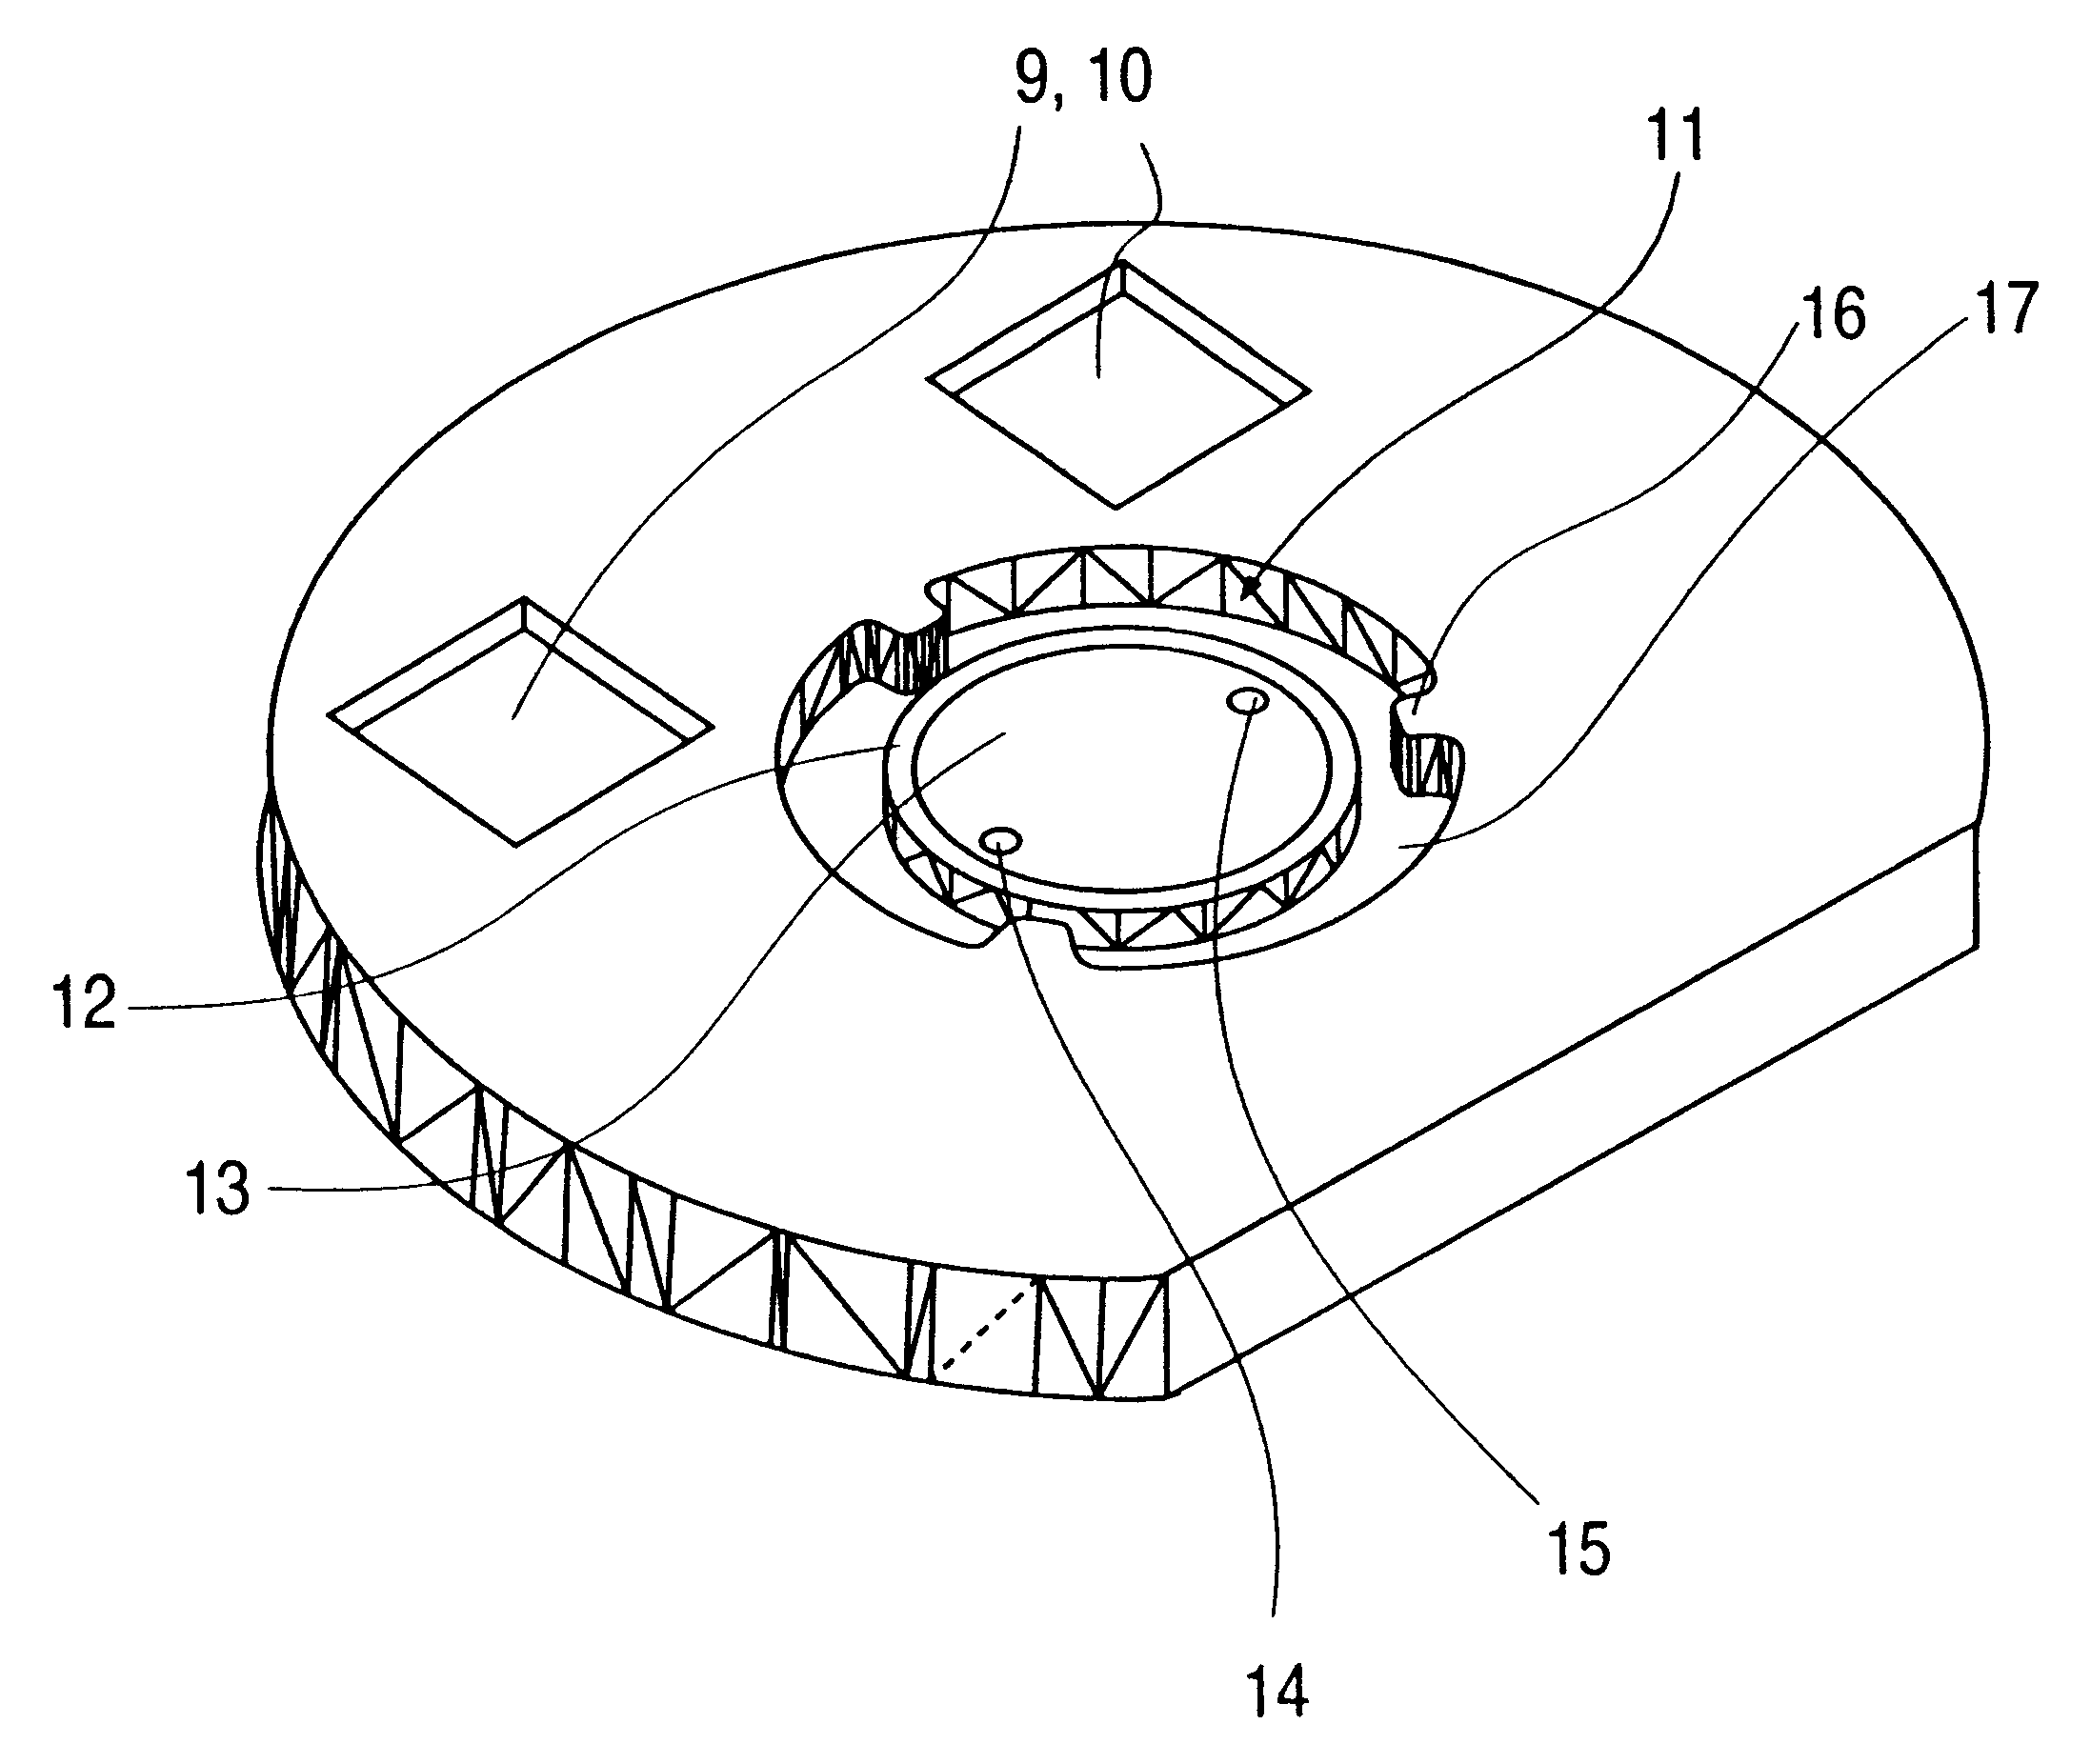 Piezoelectric resonator, process for the fabrication thereof including its use as a sensor element for the determination of the concentration of a substance contained in a liquid and/or for the determination of the physical properties of the liquid